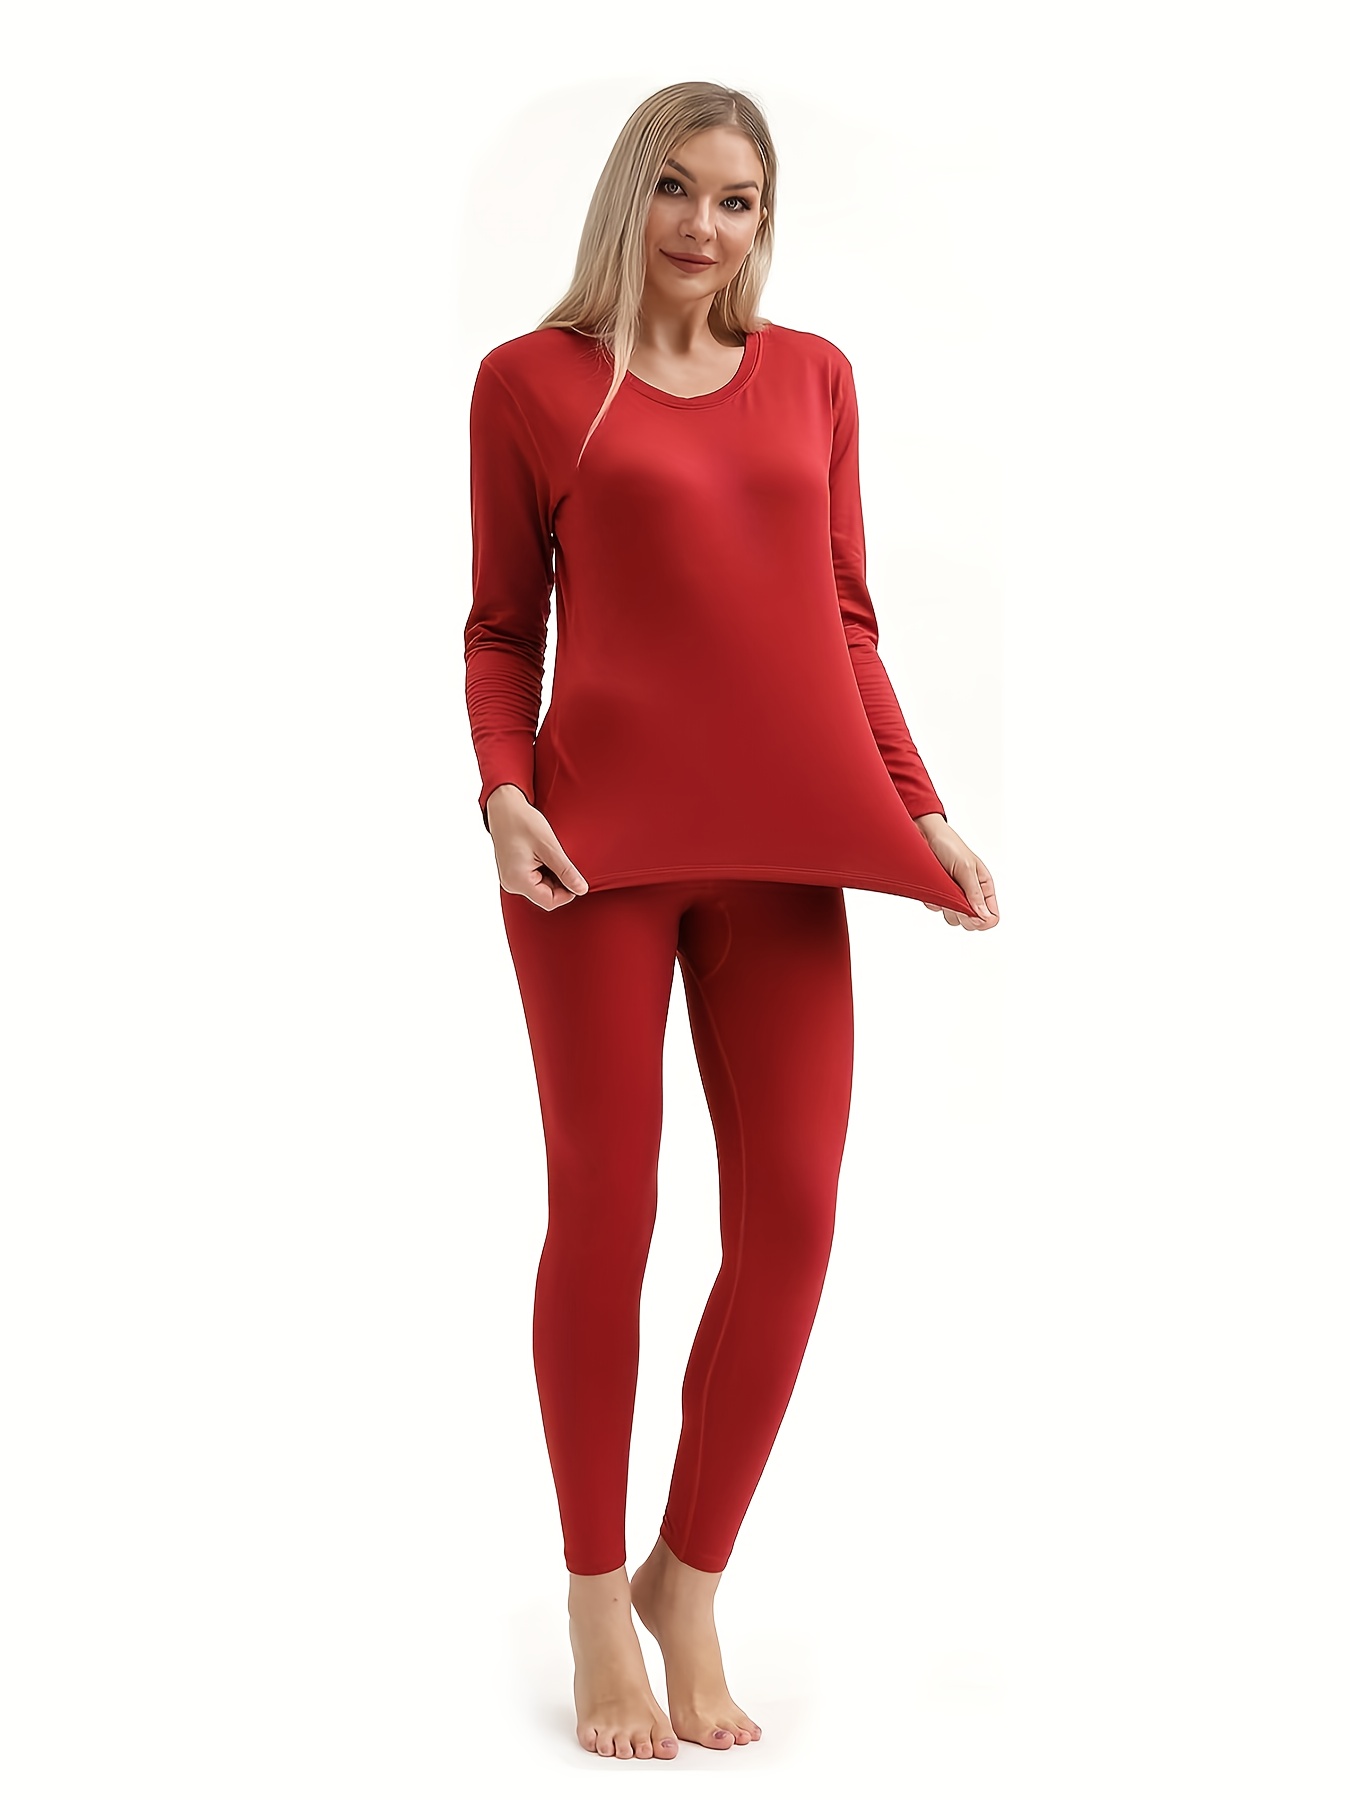 Sports Thermal Underwear Women's Large Size Seamless Round Neck Tight  Heating Autumn And Winter Ski Thermal Suit Long Johns